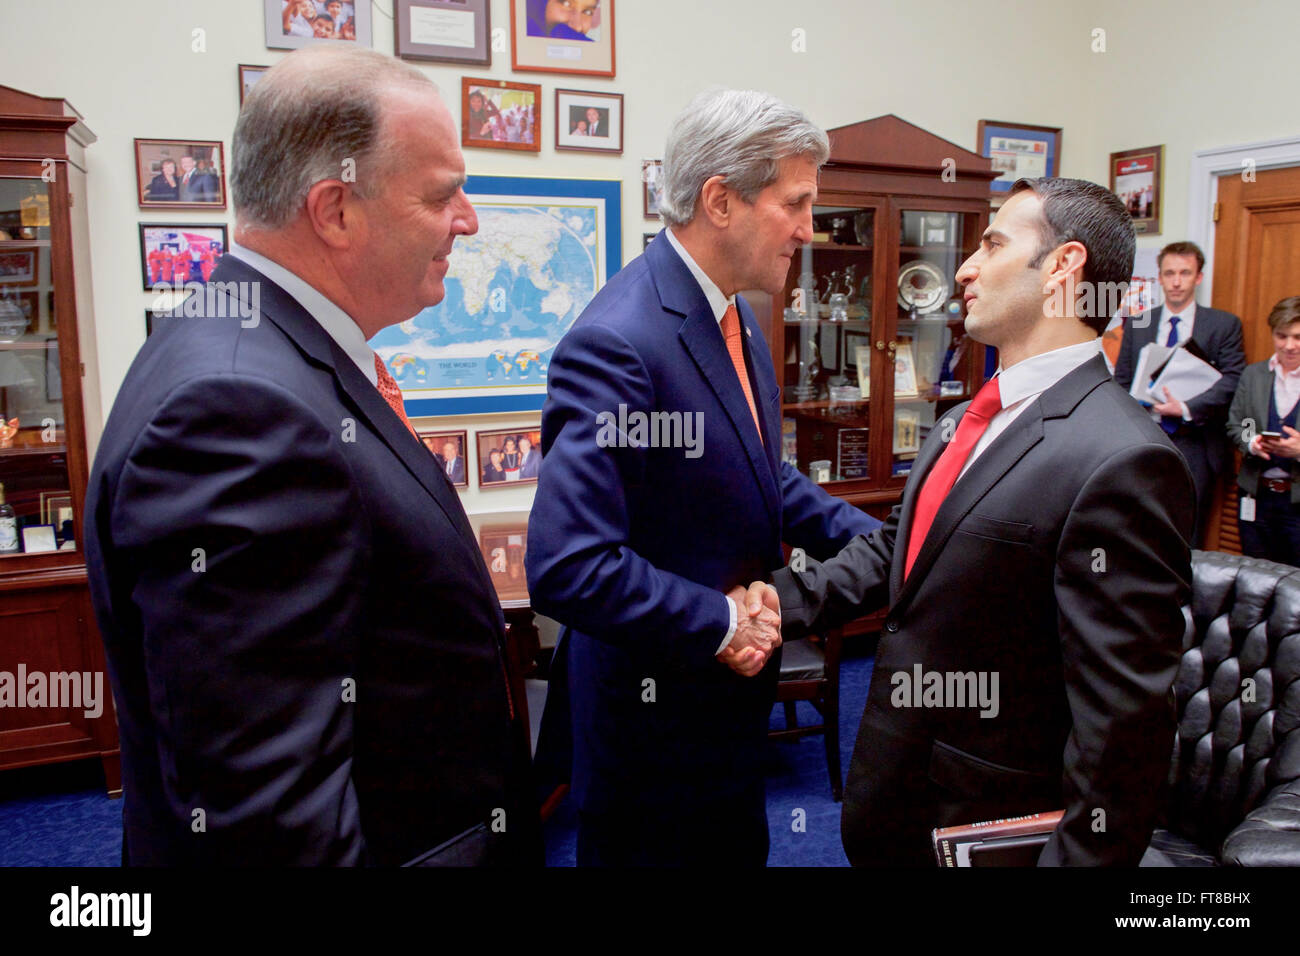 U.S. Secretary of State John Kerry shakes hands with Amir Hekmati, a U.S. citizen who he helped free from unjust detainment in Iran, during a meeting on February 24, 2016, witnessed by U.S. Representative Dan Kildee of Michigan between hearings on Capitol Hill in Washington, D.C. [State Department photo/ Public Domain] Stock Photo